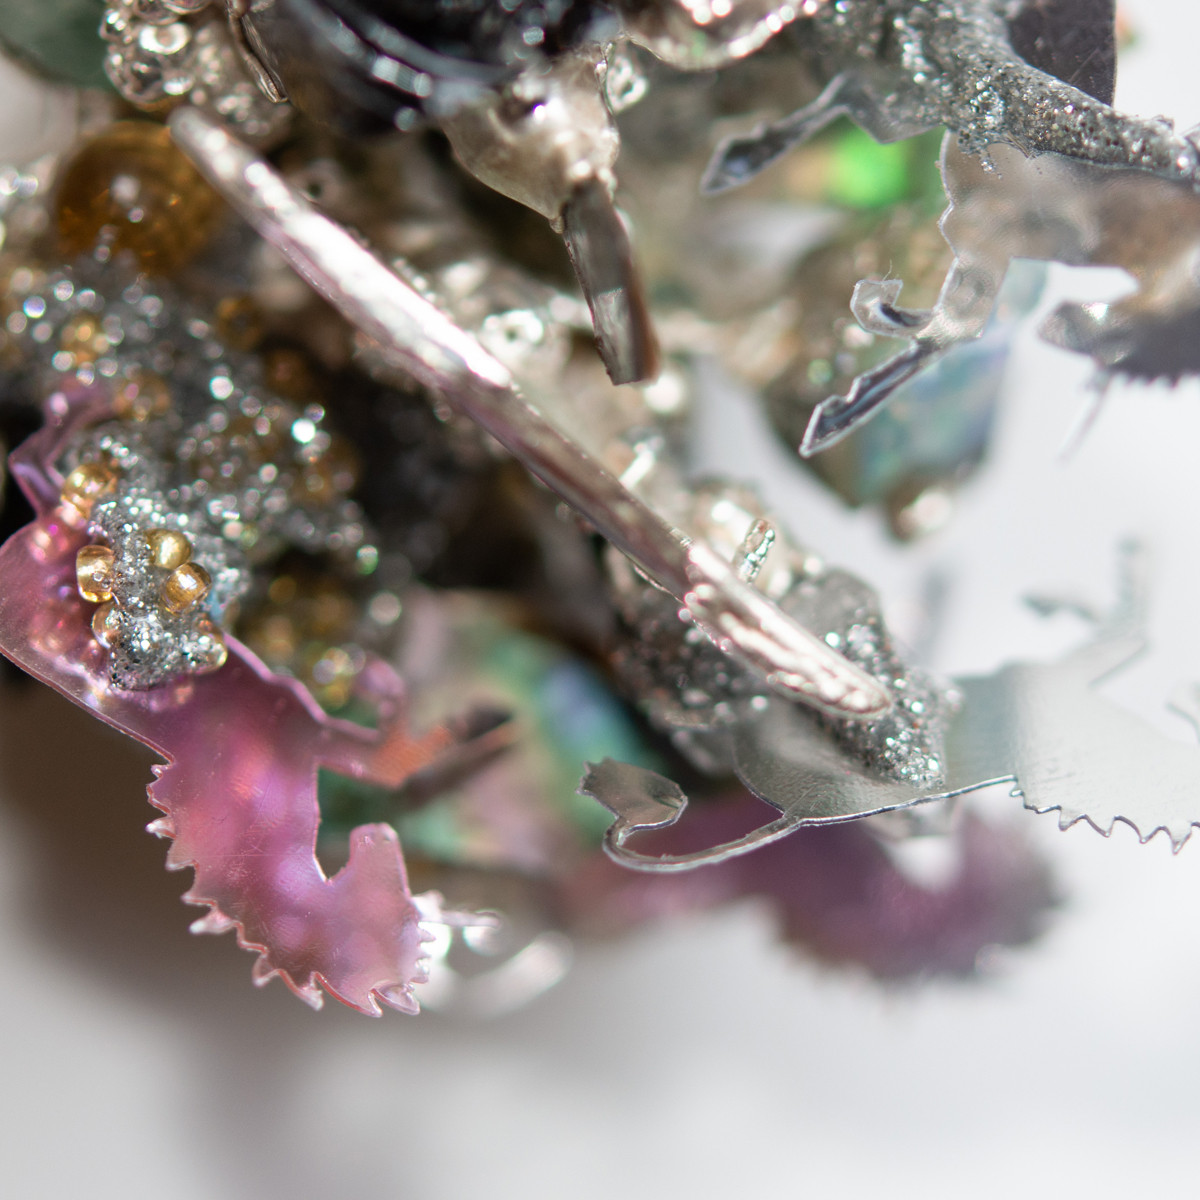 The Mess We Are All In Art Ring by Maud Traon available at tomfoolery London as a part of Art Ring 2021 exhibition.